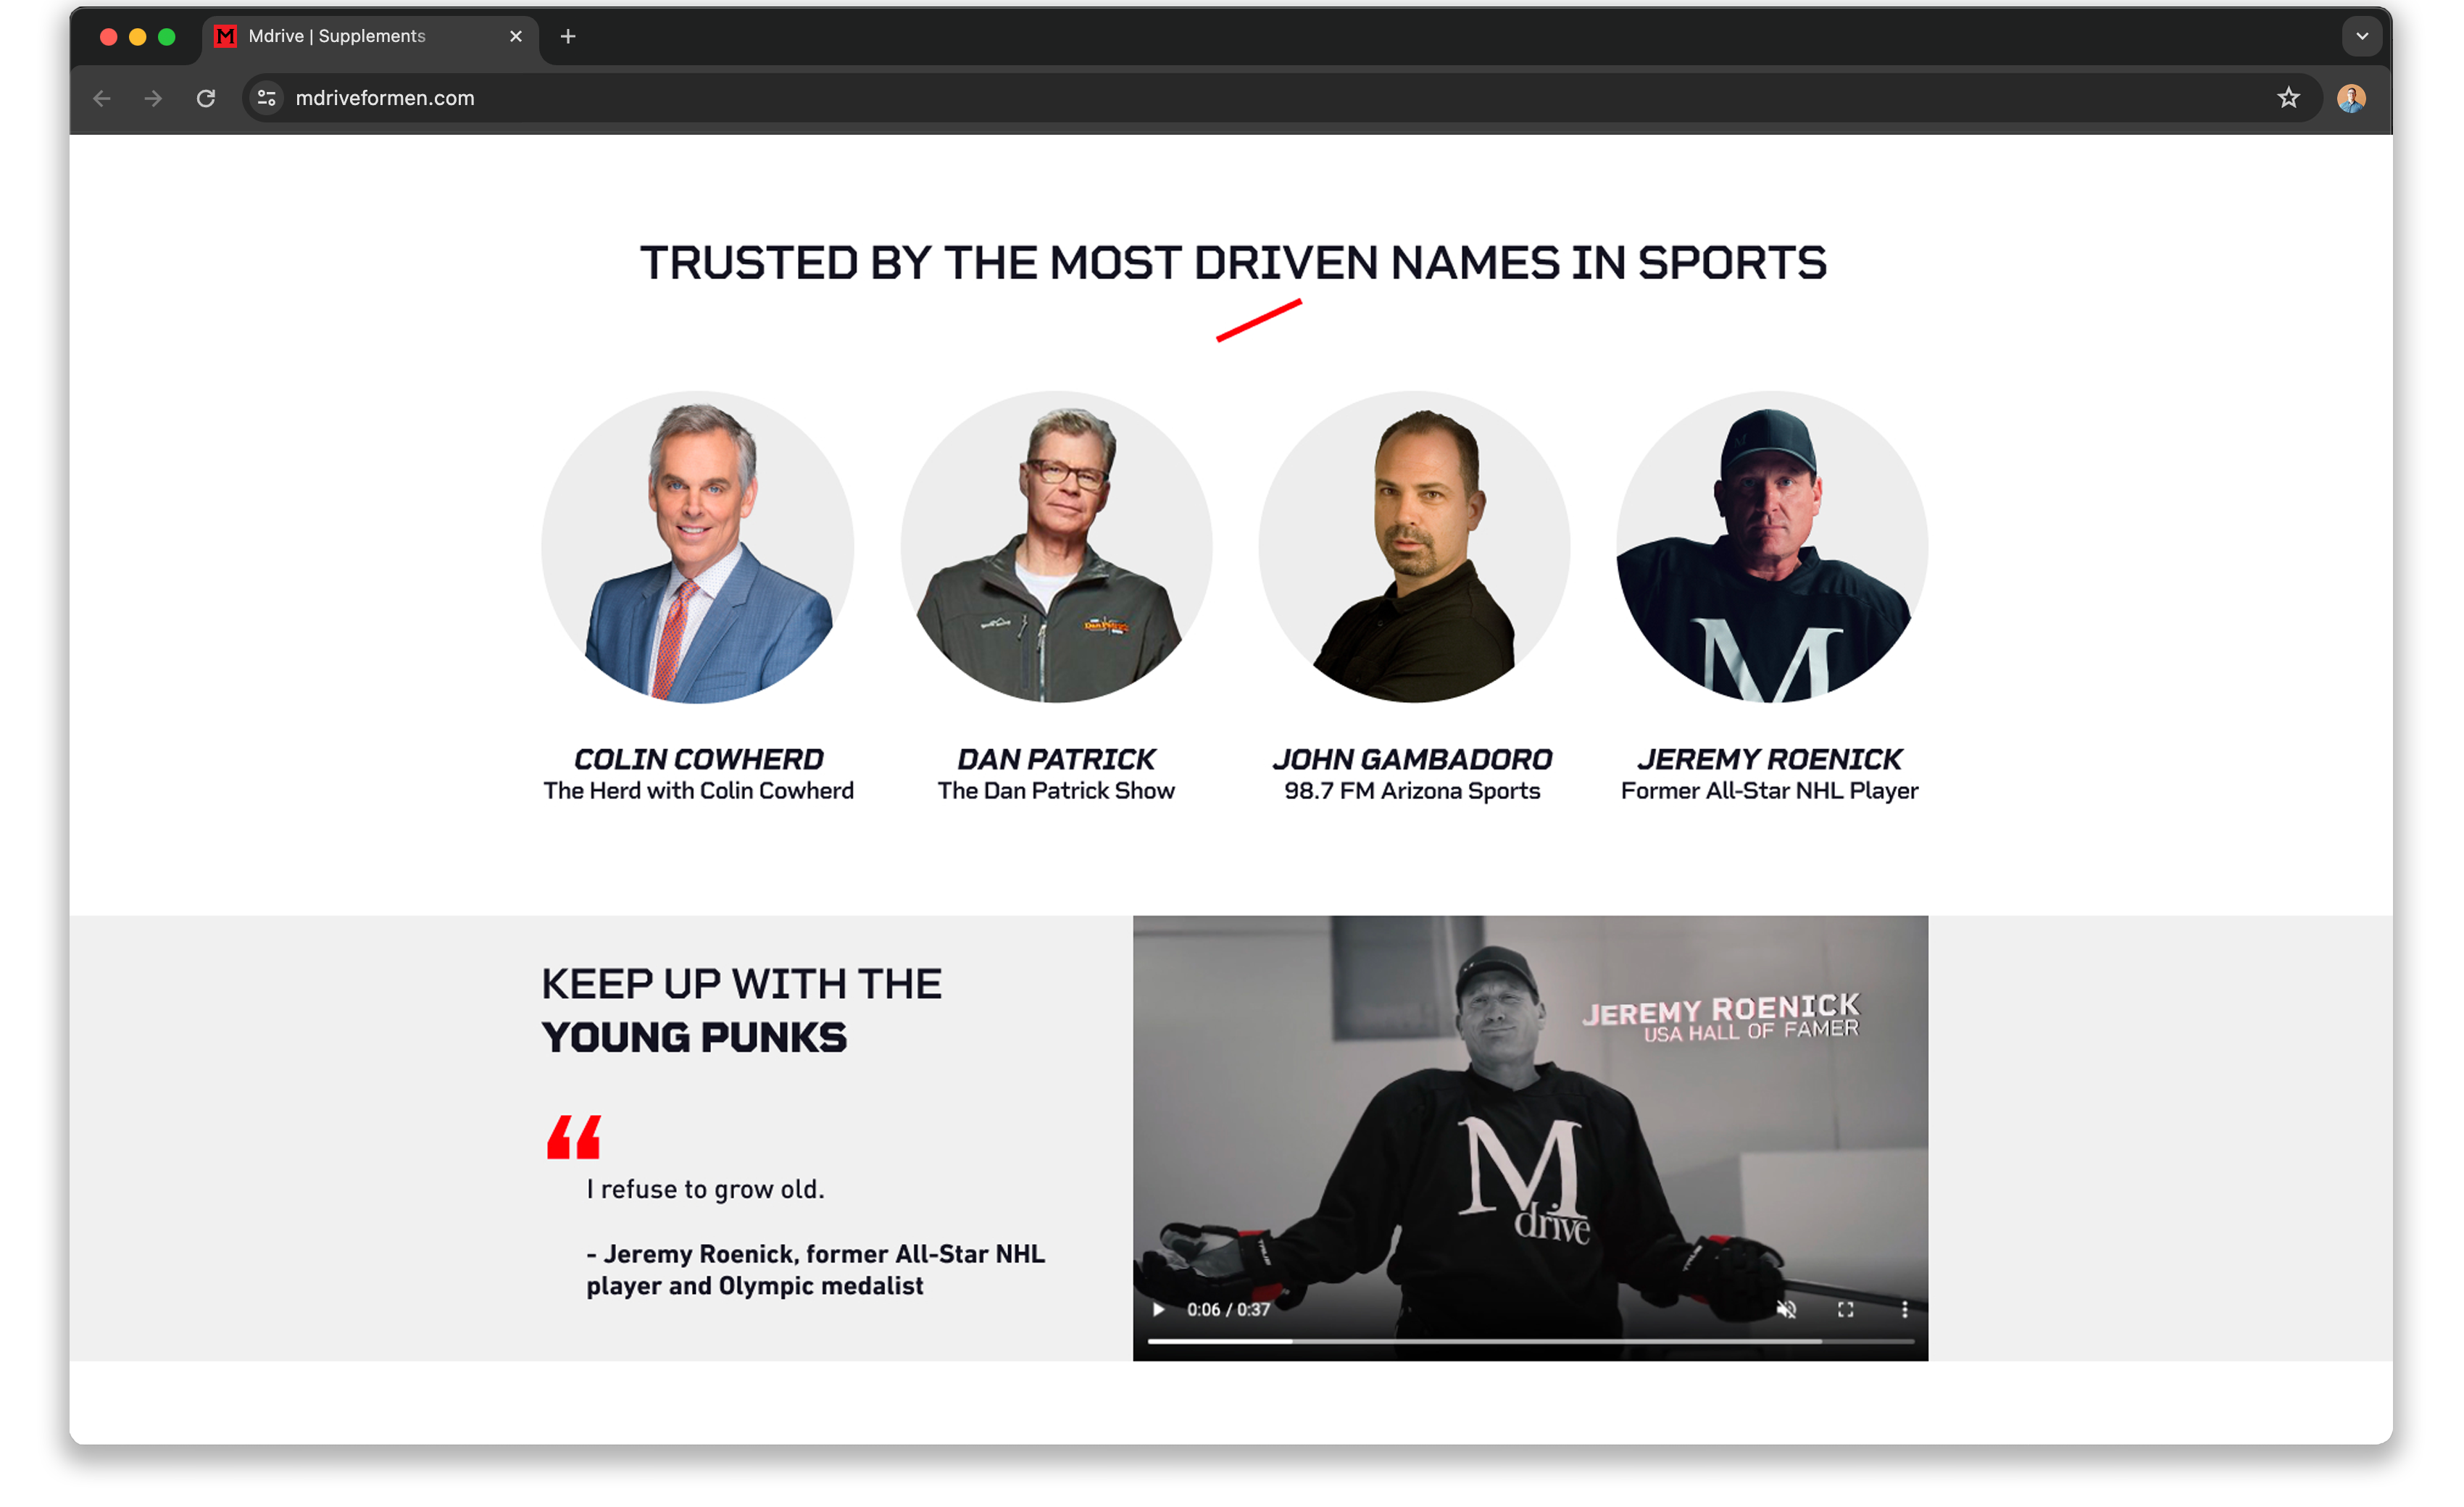 Index page mocked up in browser window showing sports names advocating the brand